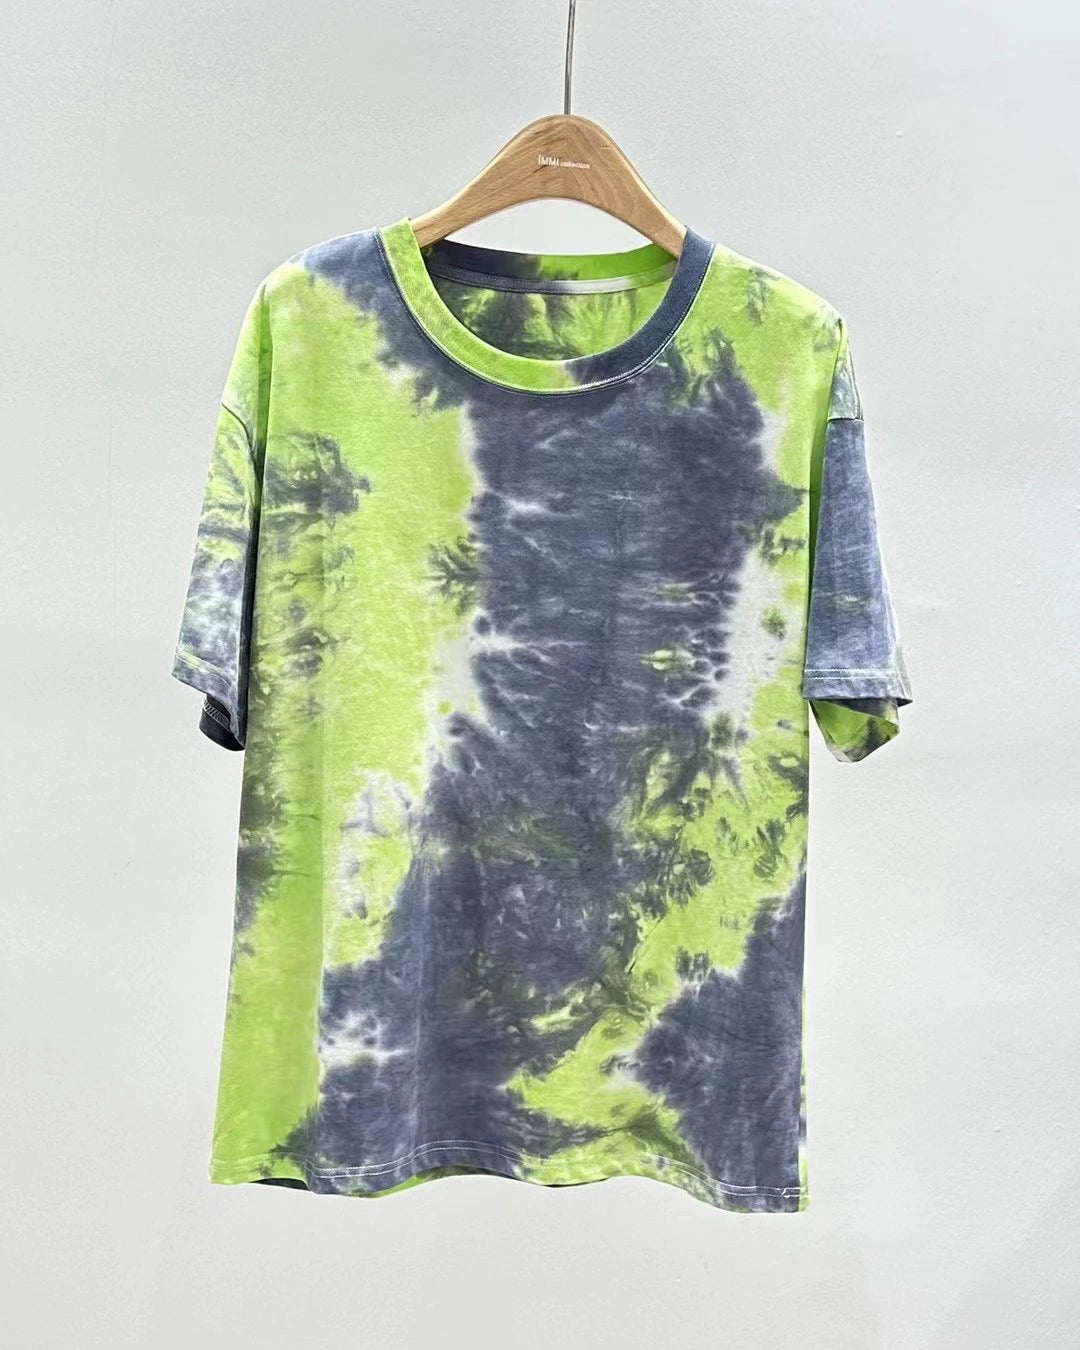 Colorful Tie Dye T - Shirts for Men and Women - Vibrant and Comfortable Casual Wear - Seakoff